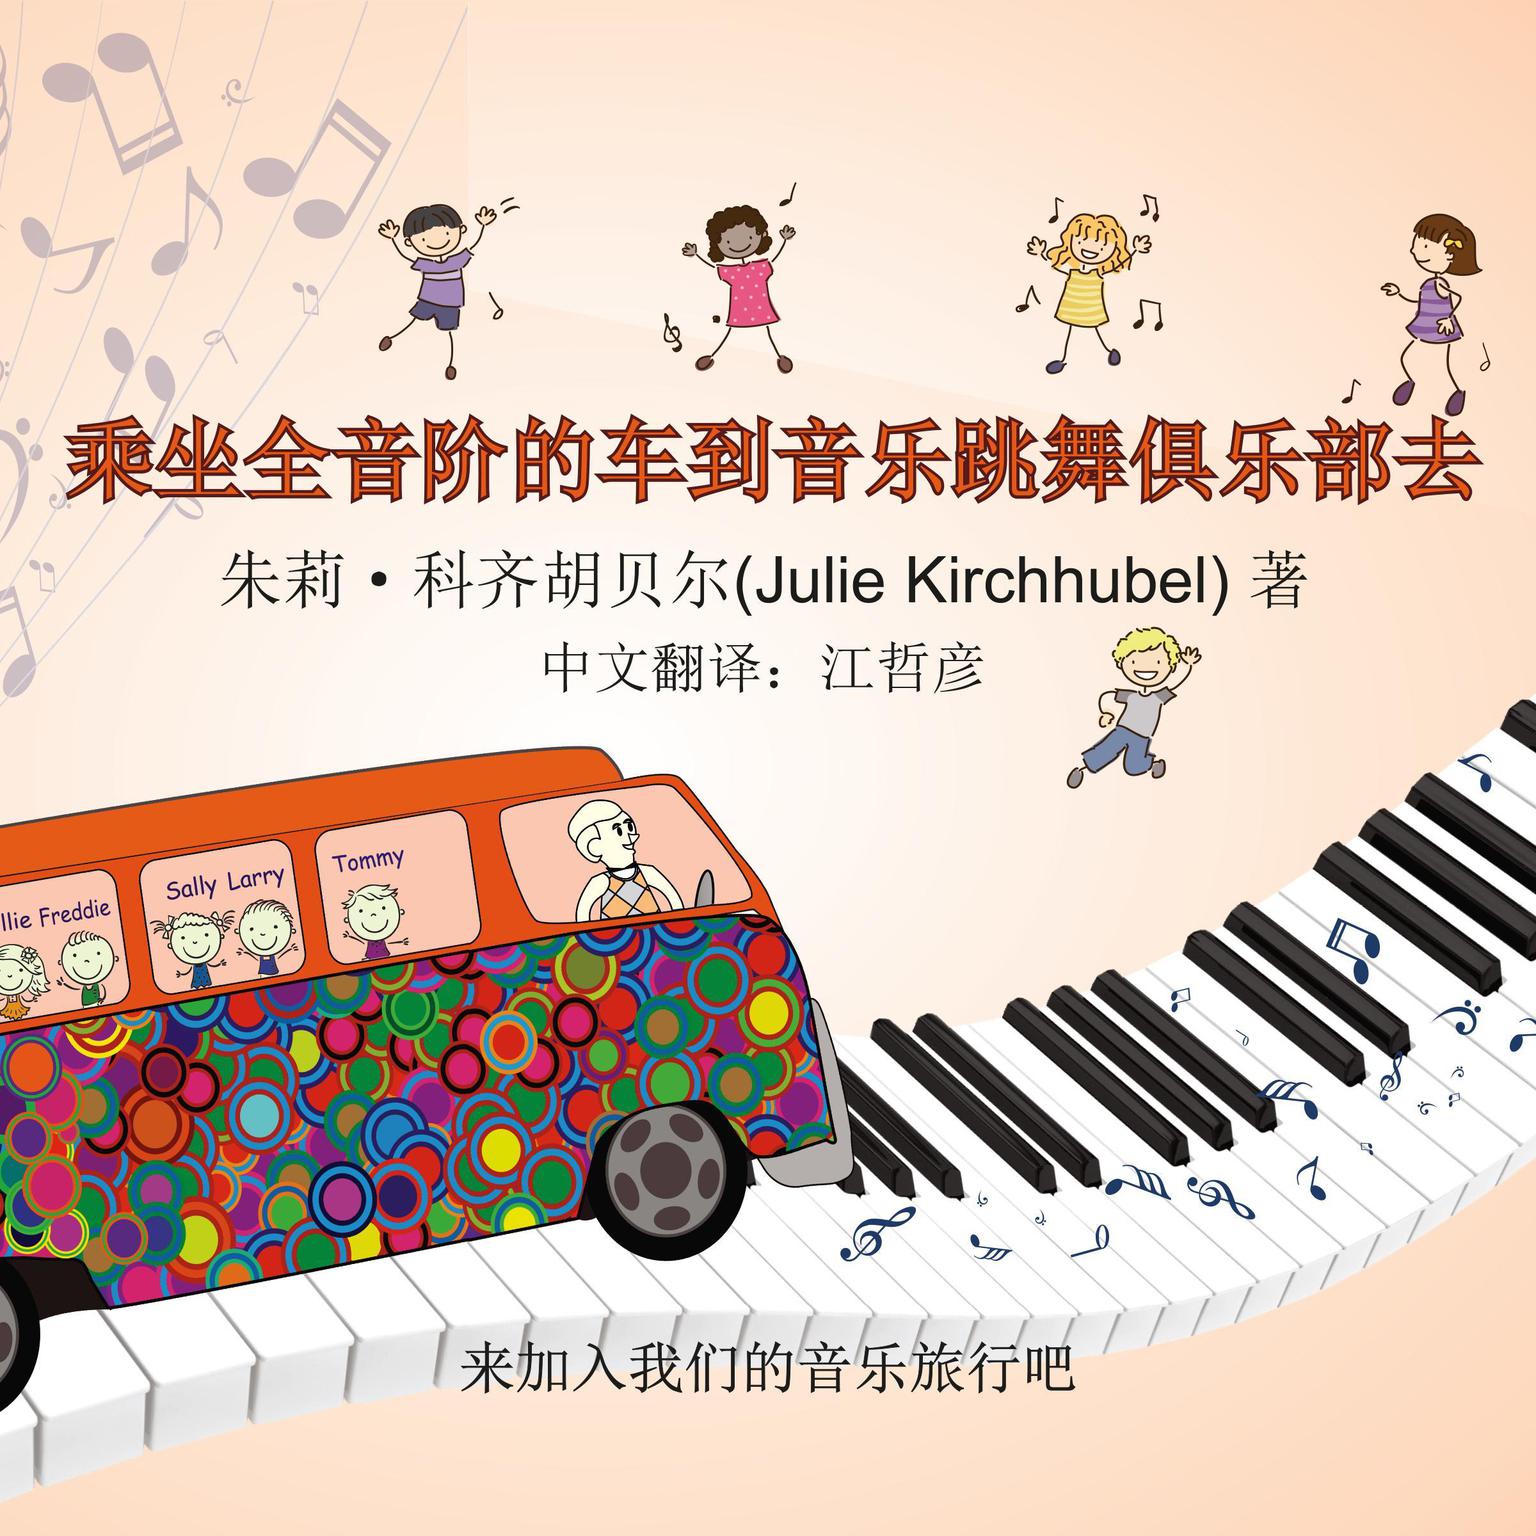 The Diatonics Drive To The Musical Dance Club - Chinese: Come Join Our Musical Journey Audiobook, by Julie Kirchhubel